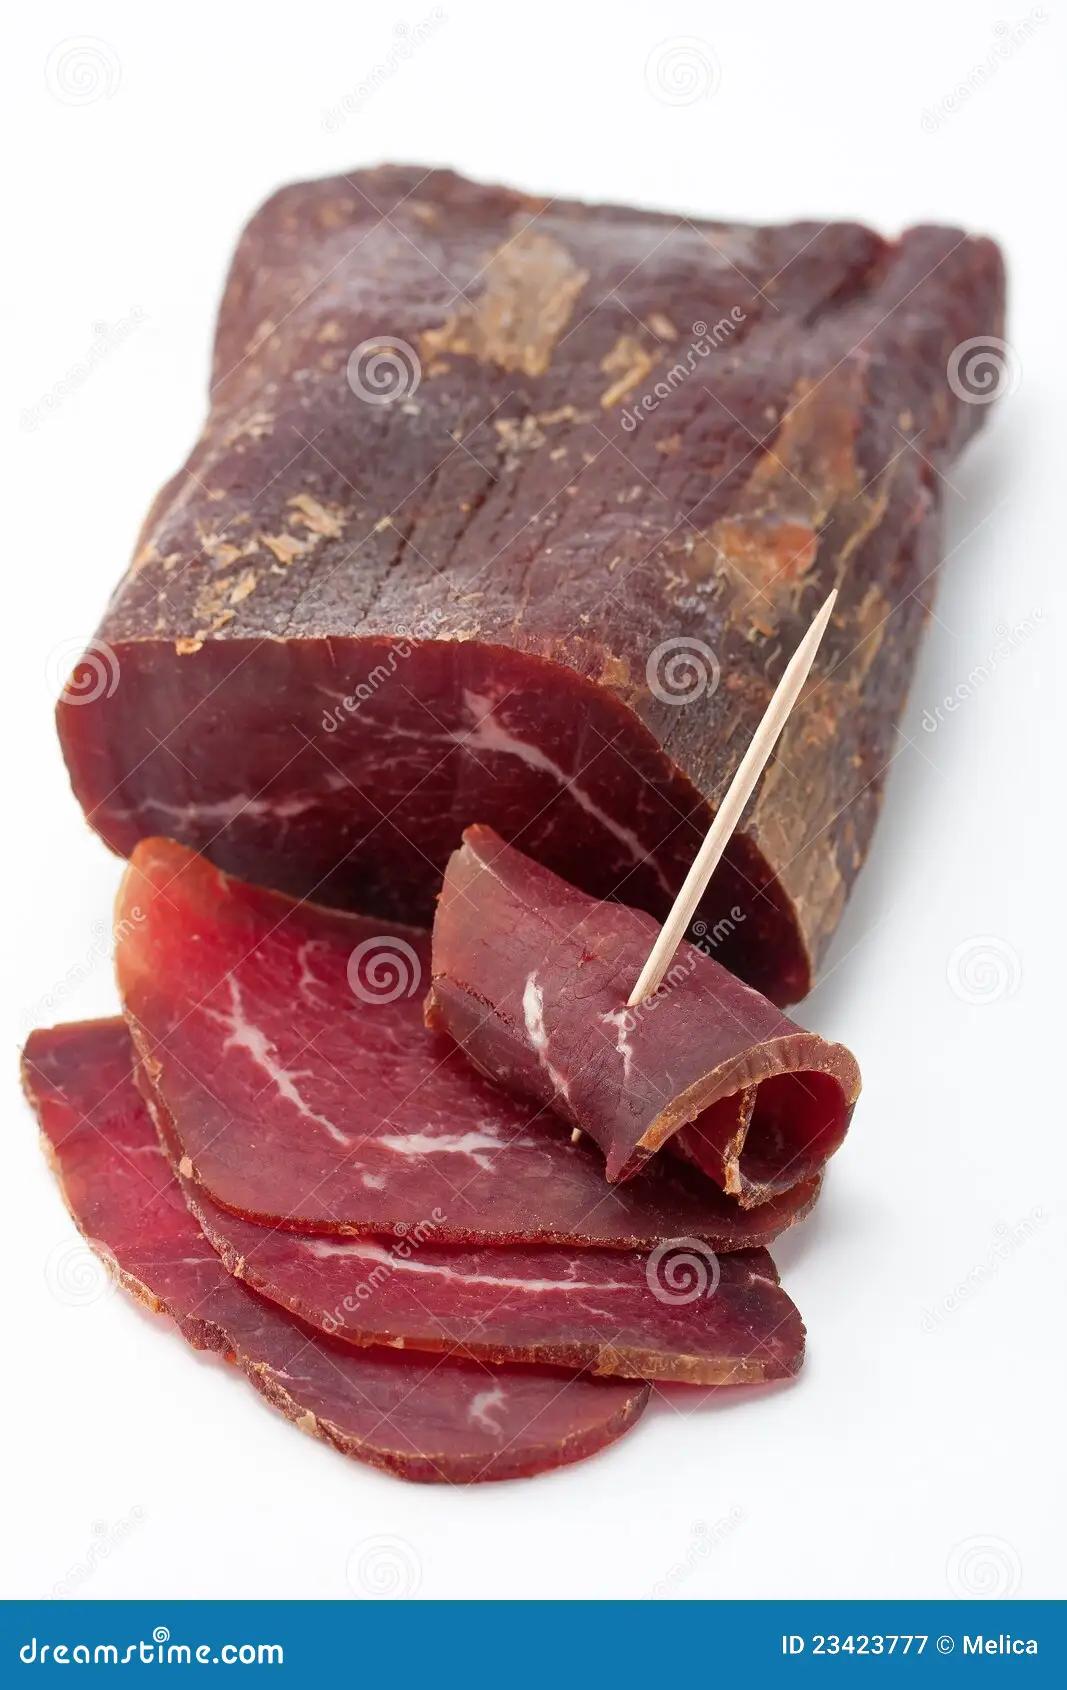 dried smoked meat - What cured meats are smoked